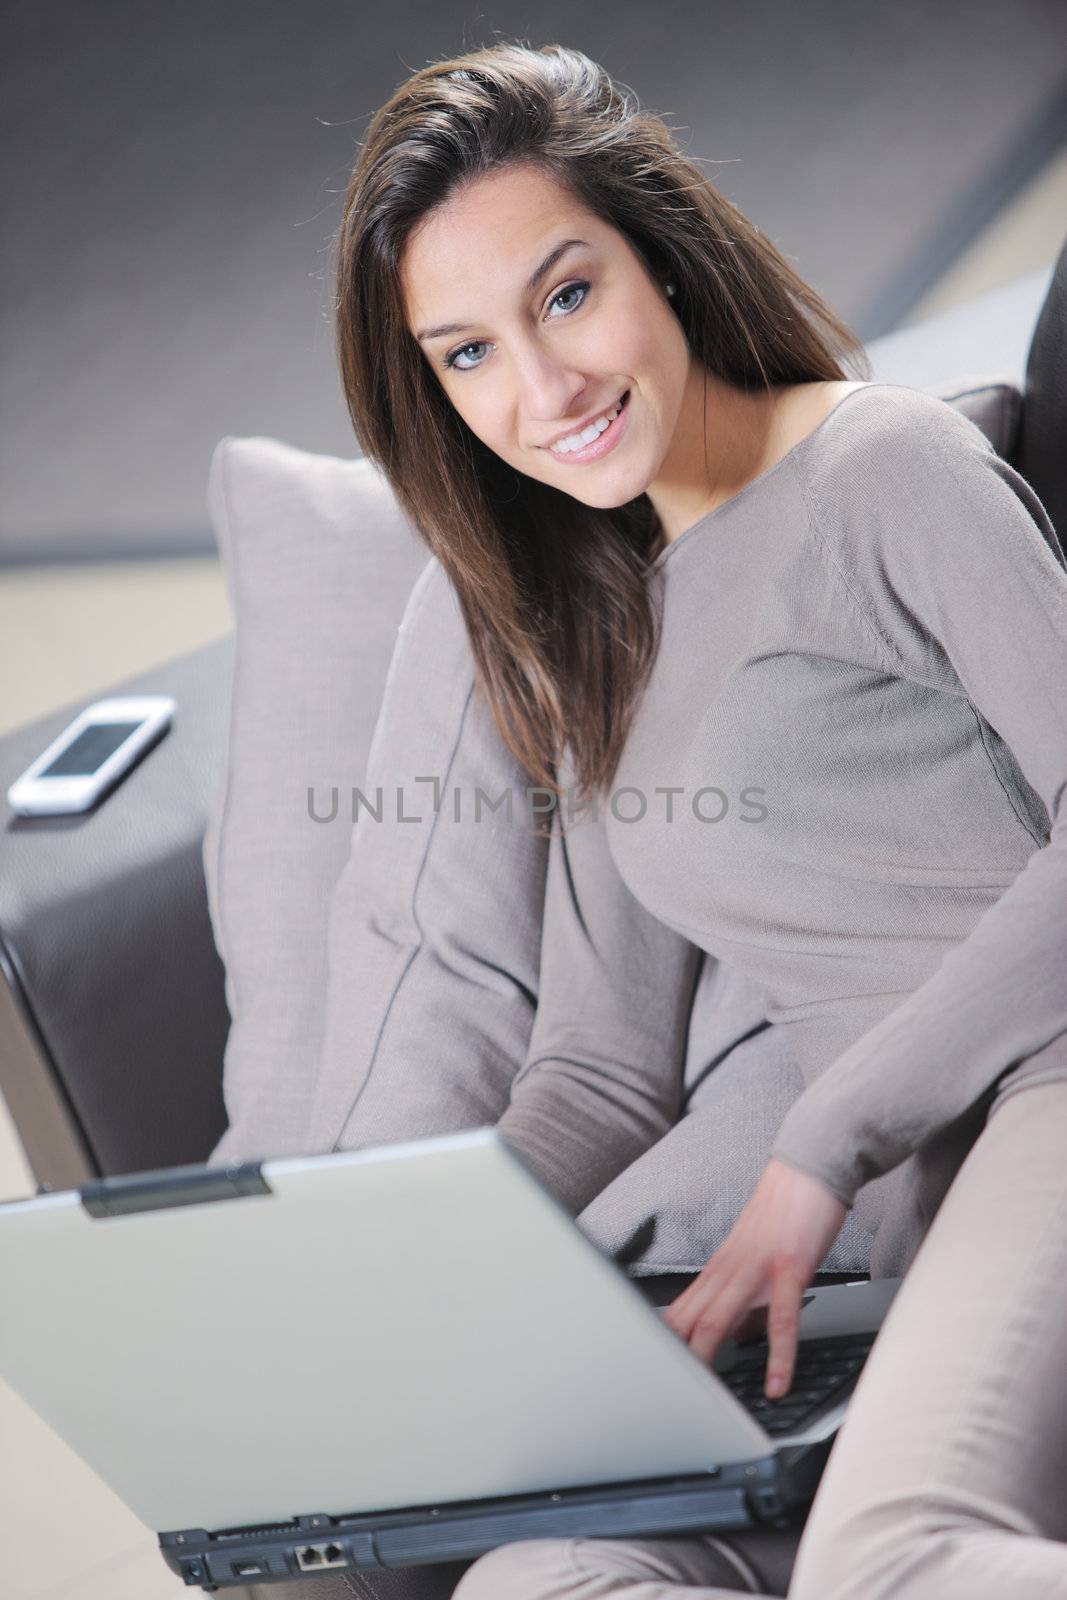 Smiling woman using her laptop in the living room.